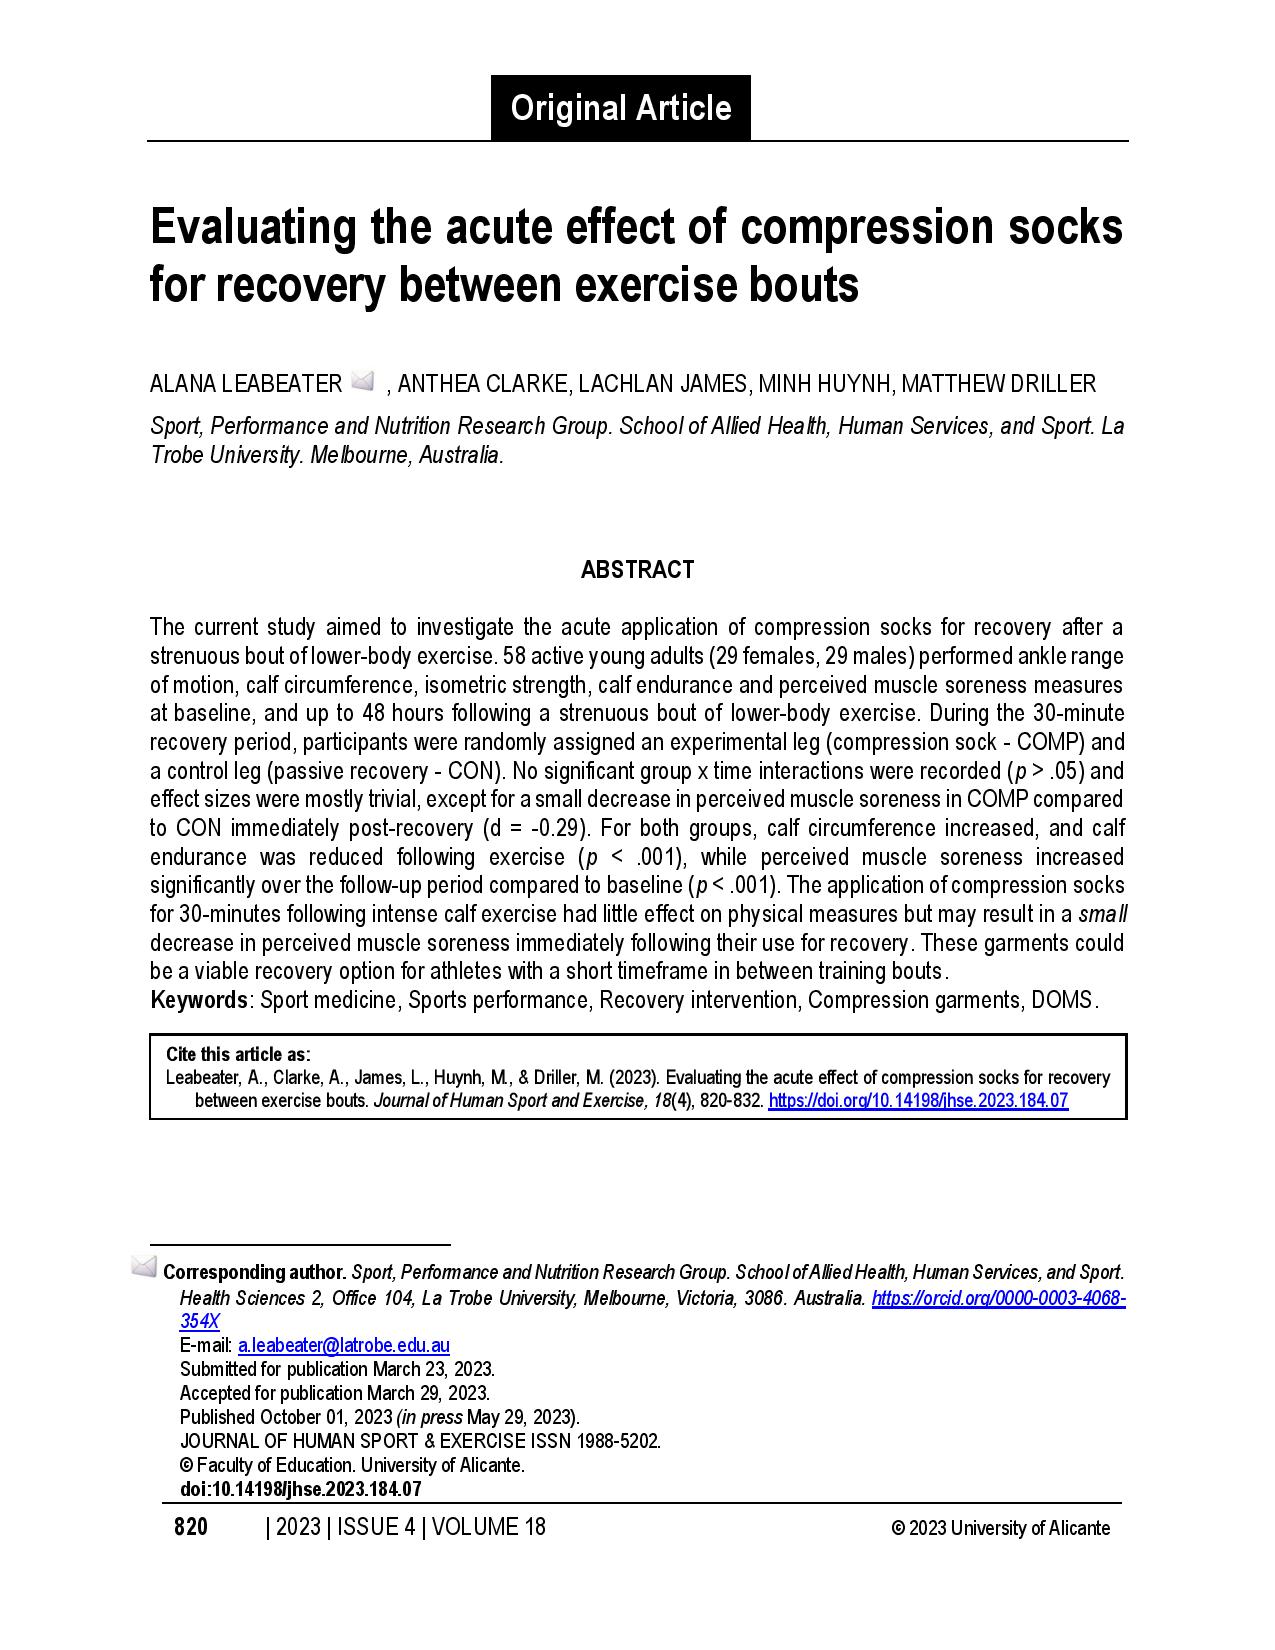 Evaluating the acute effect of compression socks for recovery between exercise bouts